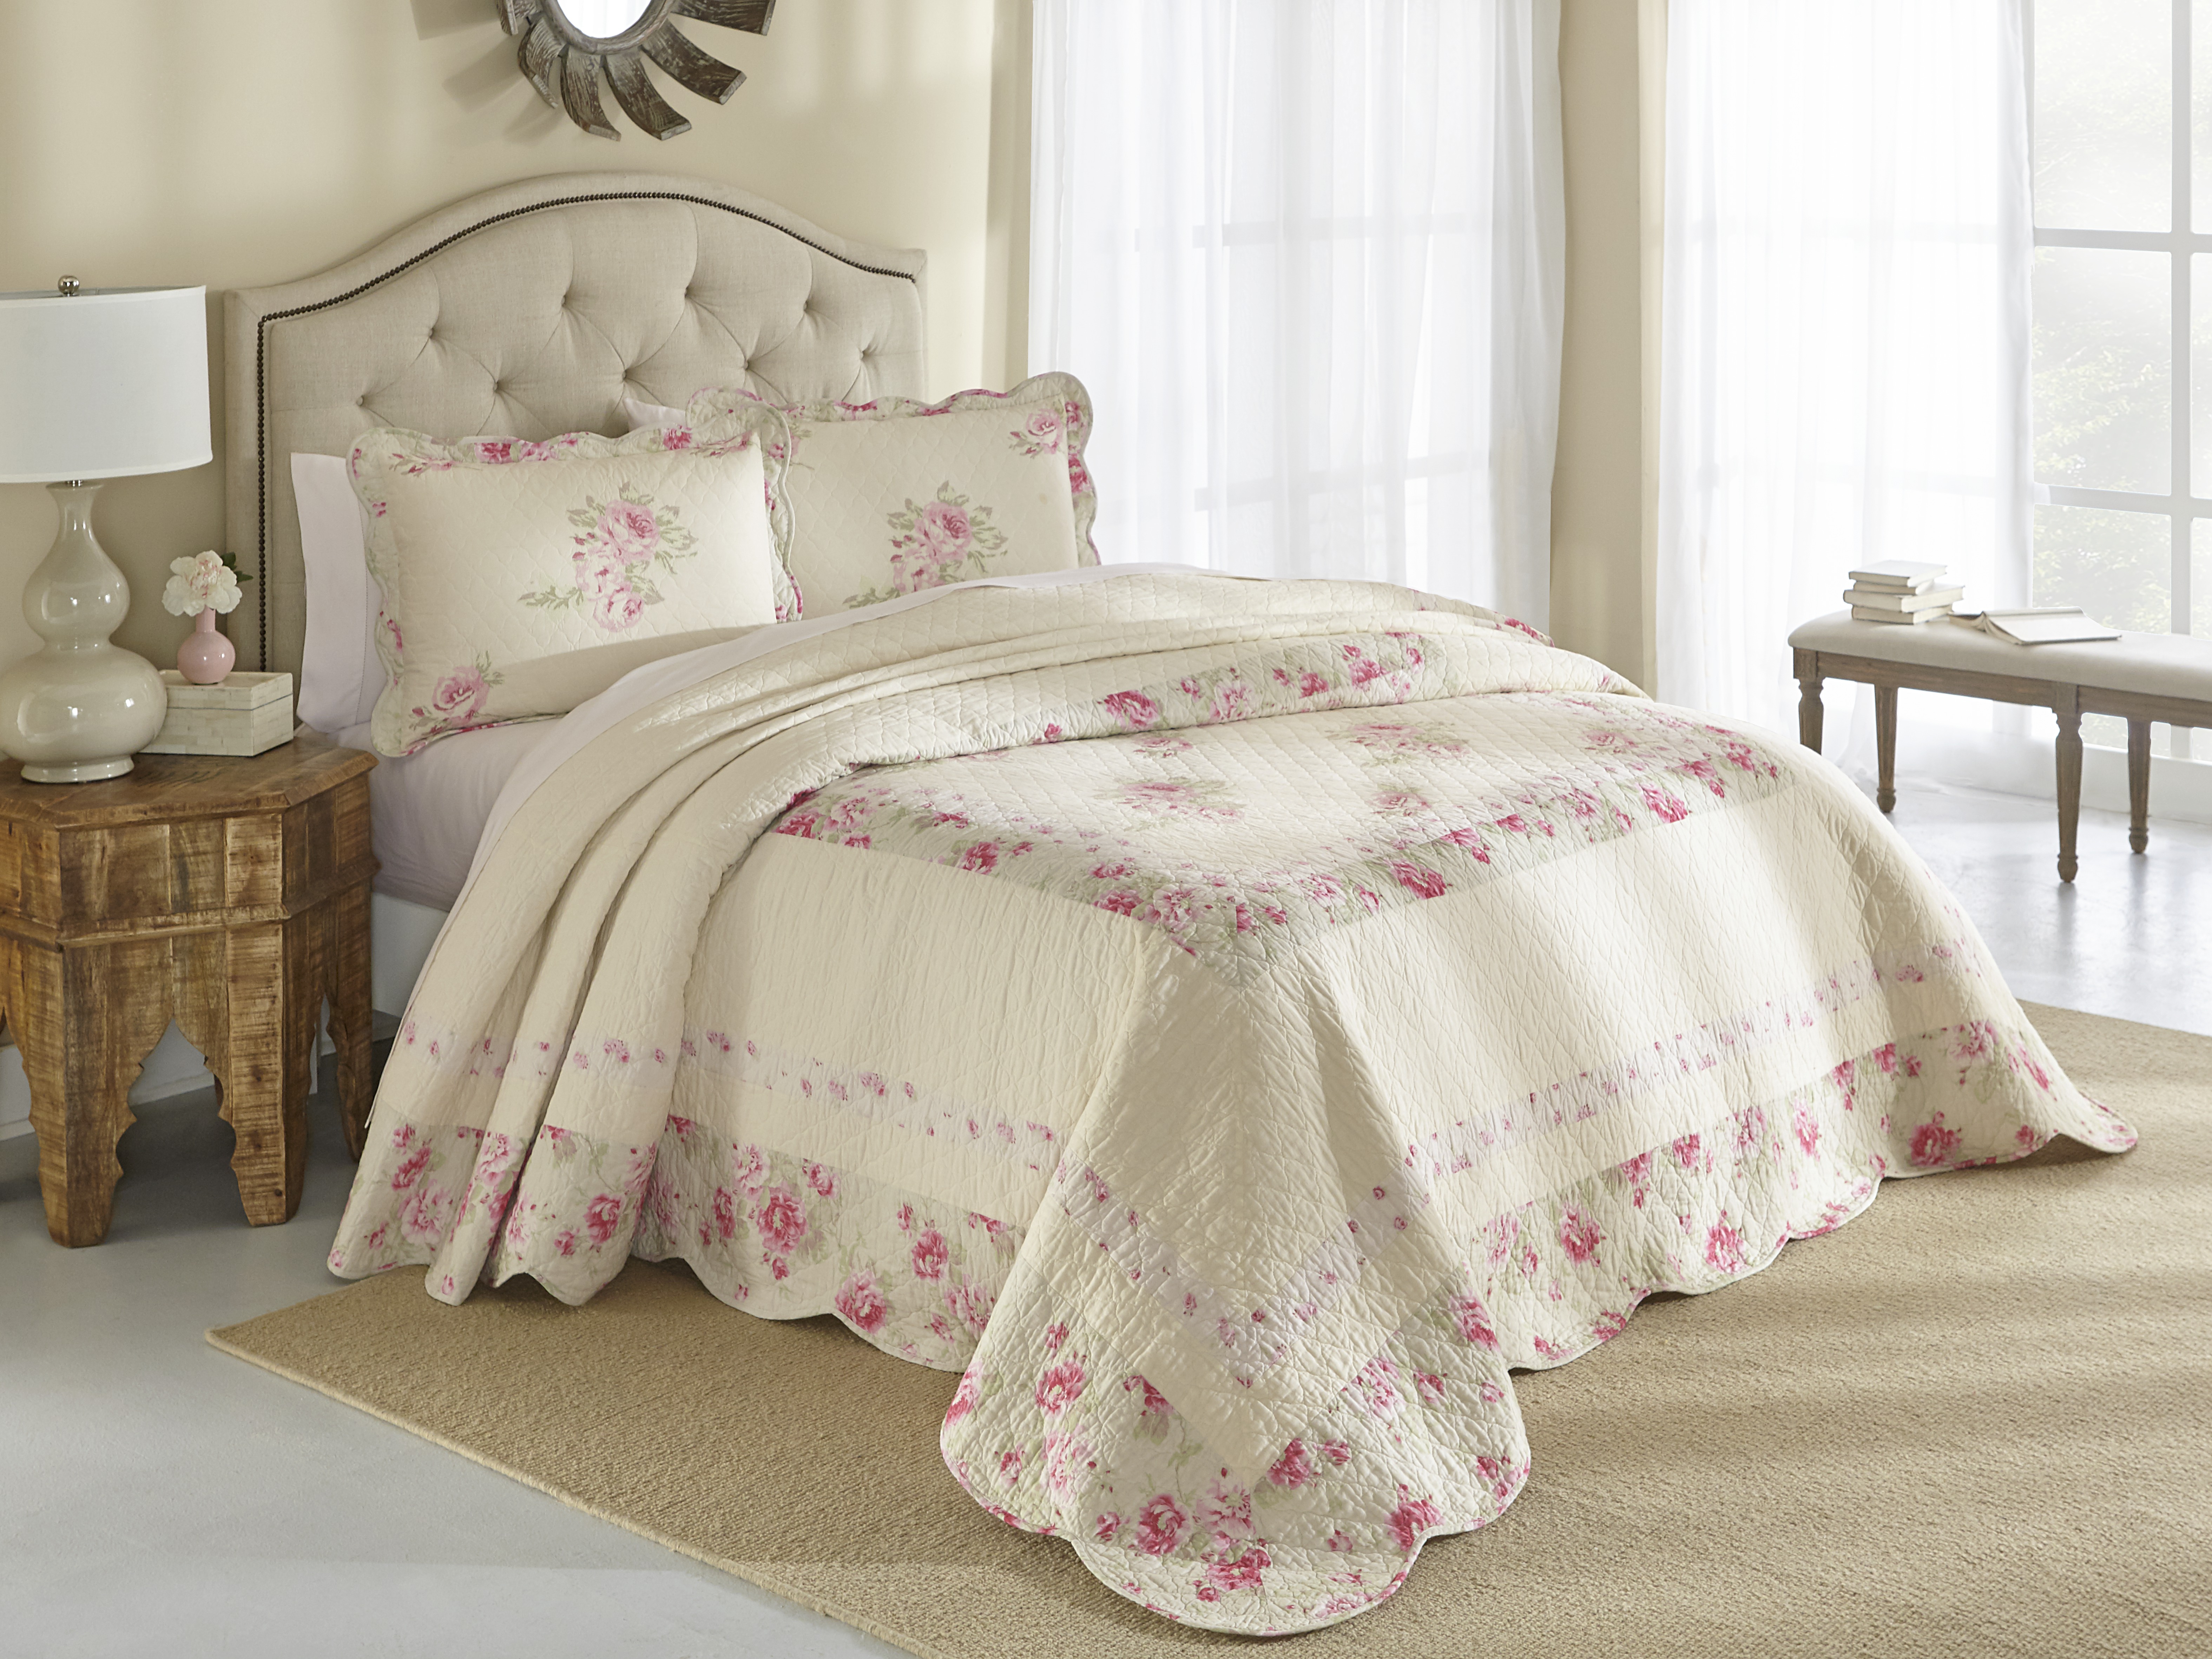 Cannon Embroidered Bedspread &#8211; Rosette Floral